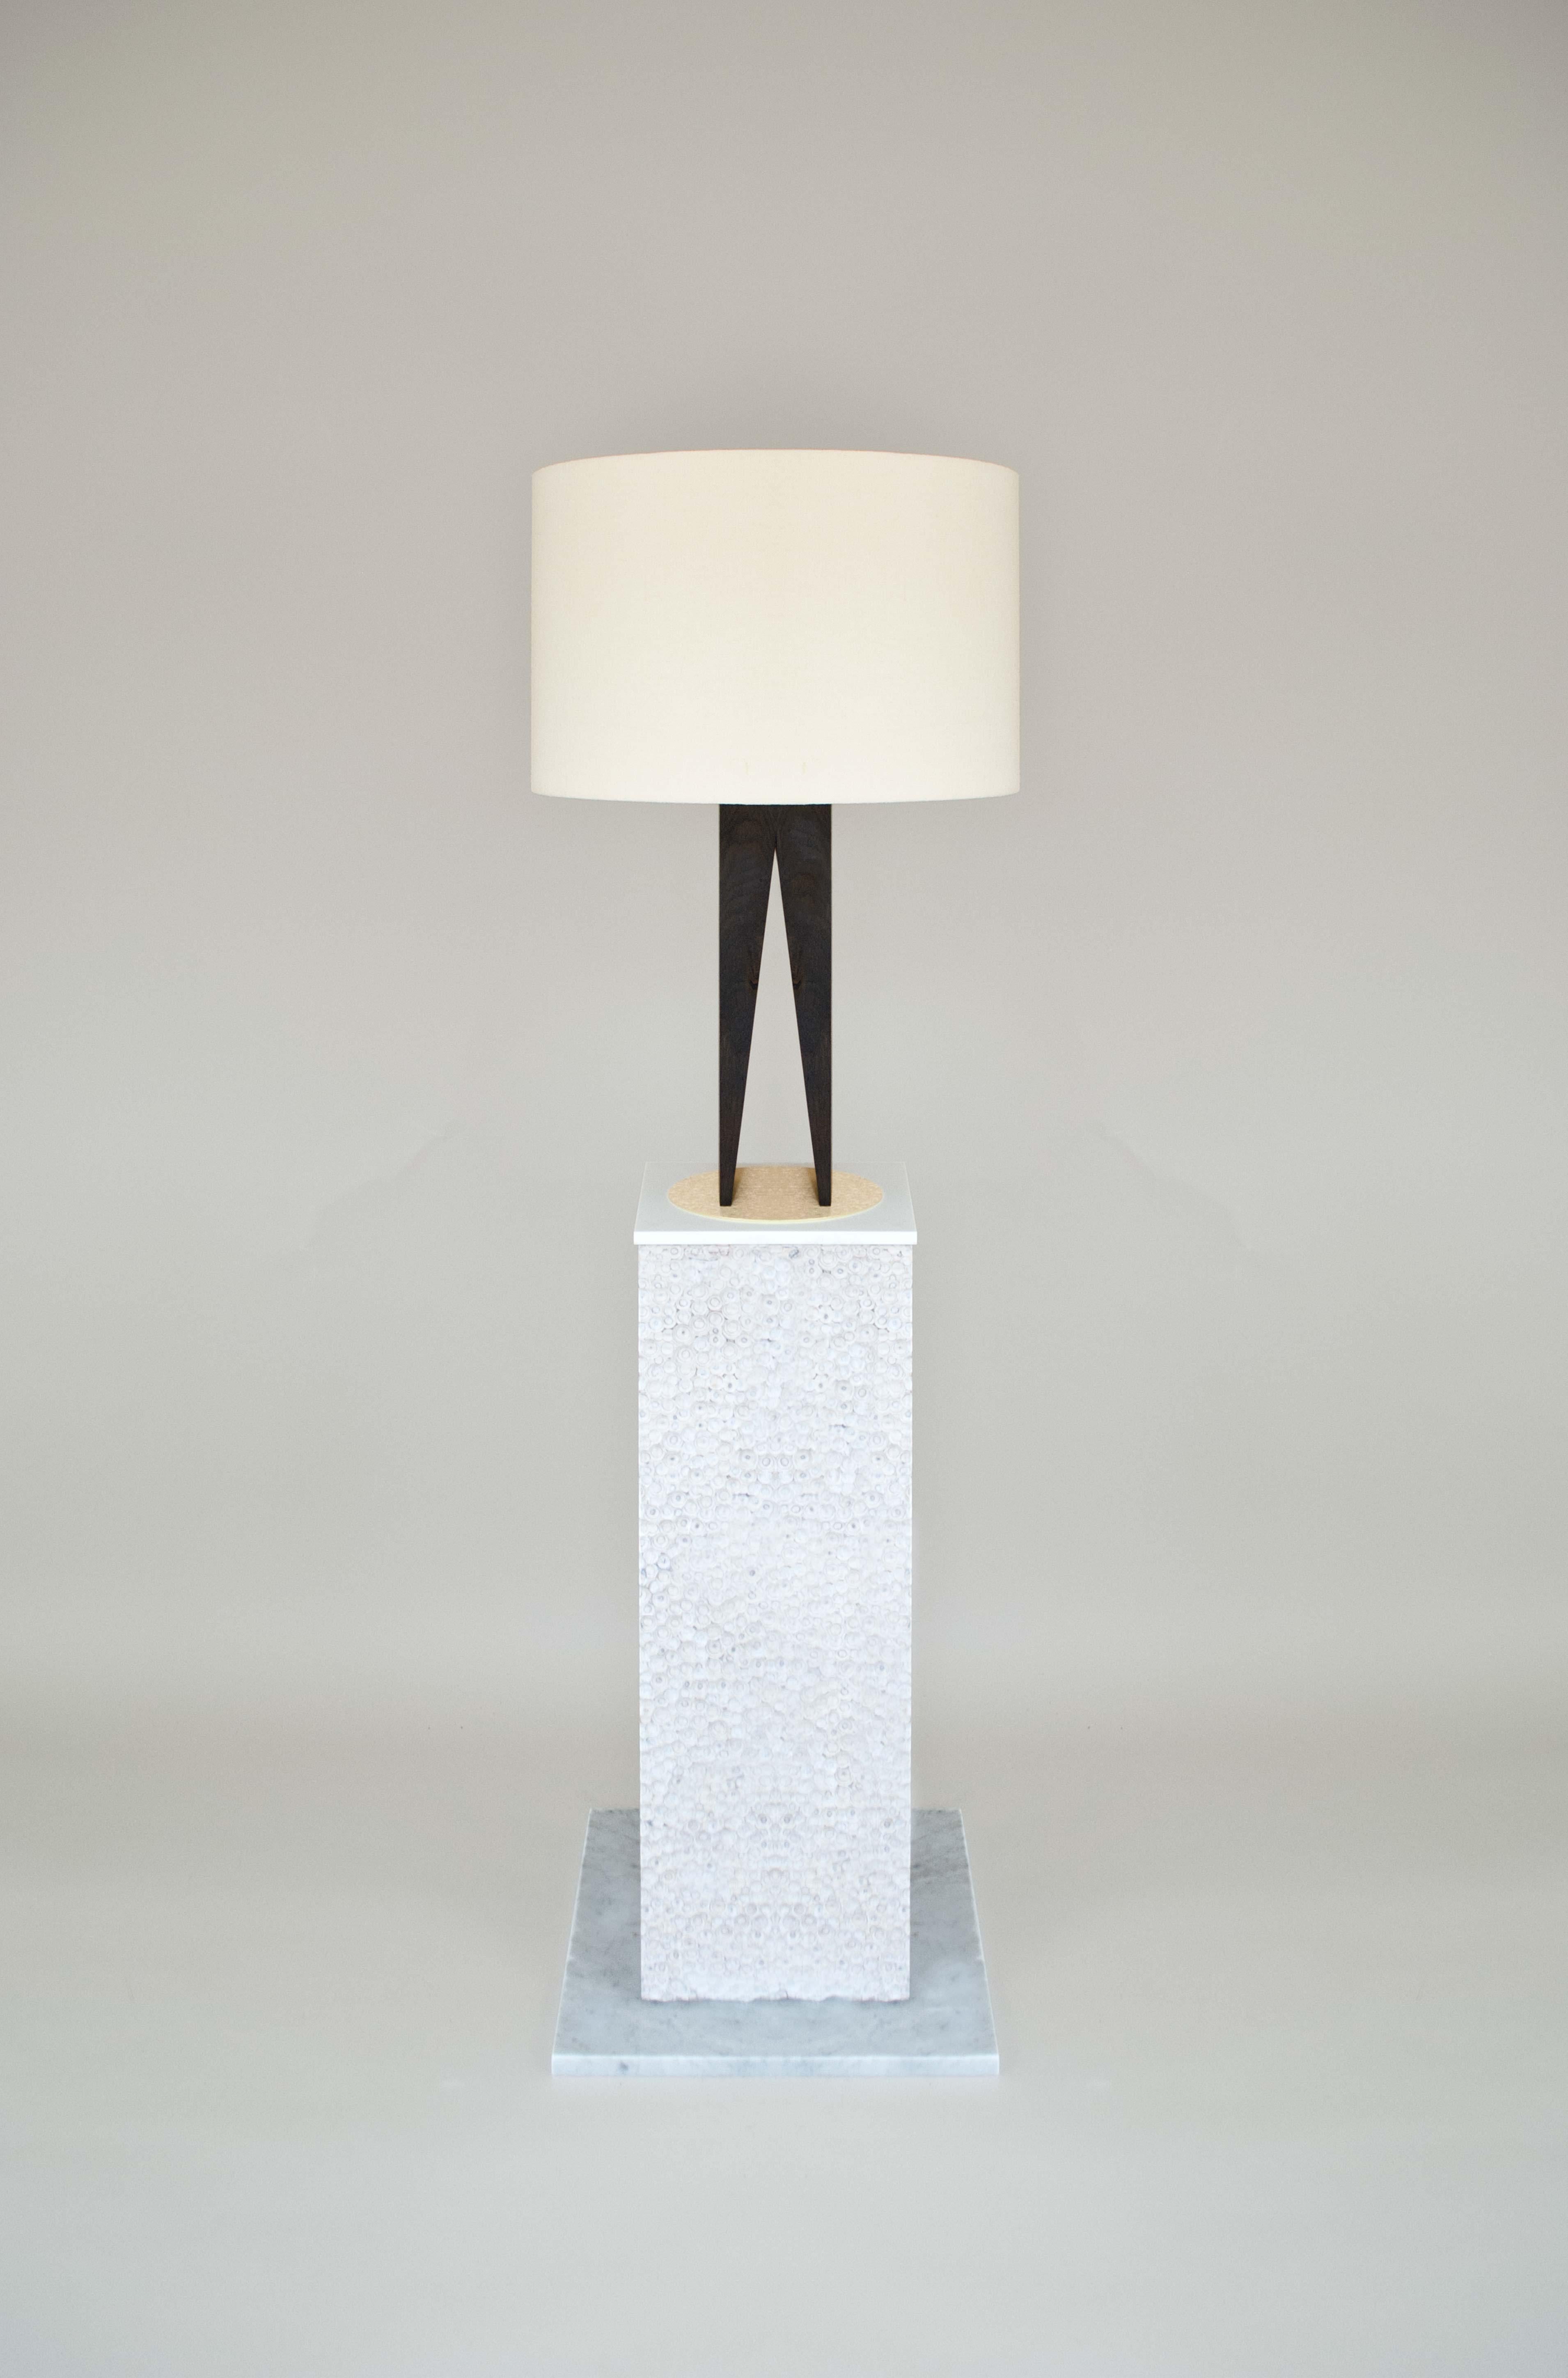 The V Lamp inspired by Bauhaus and Art Deco design it is comprised of a solid oak, ebonised stand set onto a brass base plate. The shade is made from a rough textured linen from Italy. 

‘V’ lamp is perfect for enhancing any contemporary space,